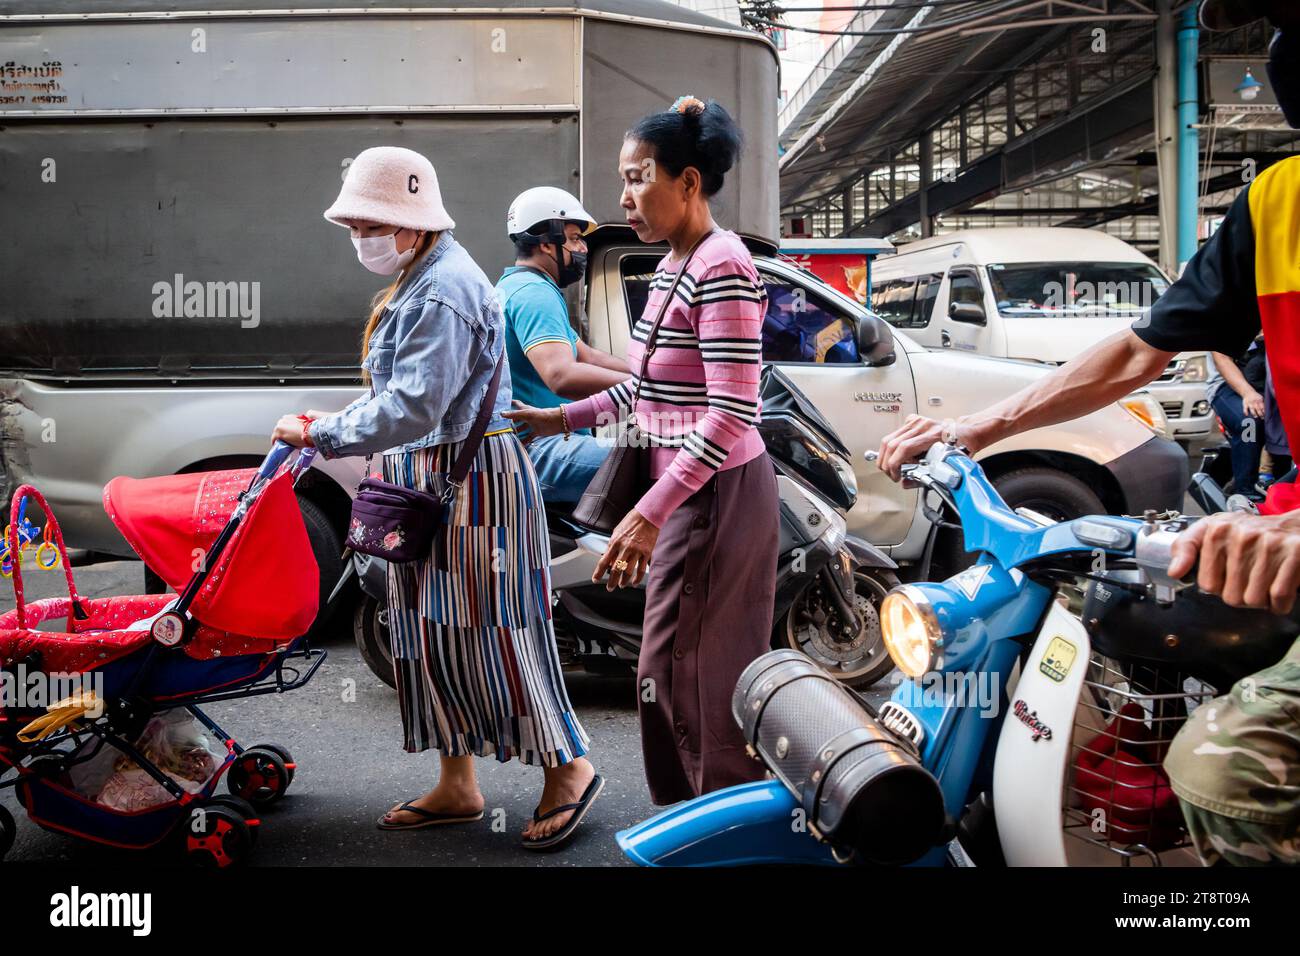 Pedestrians, shoppers and market workers busily go about their business at Pratunam market, Bangkok, Thailand. Stock Photo